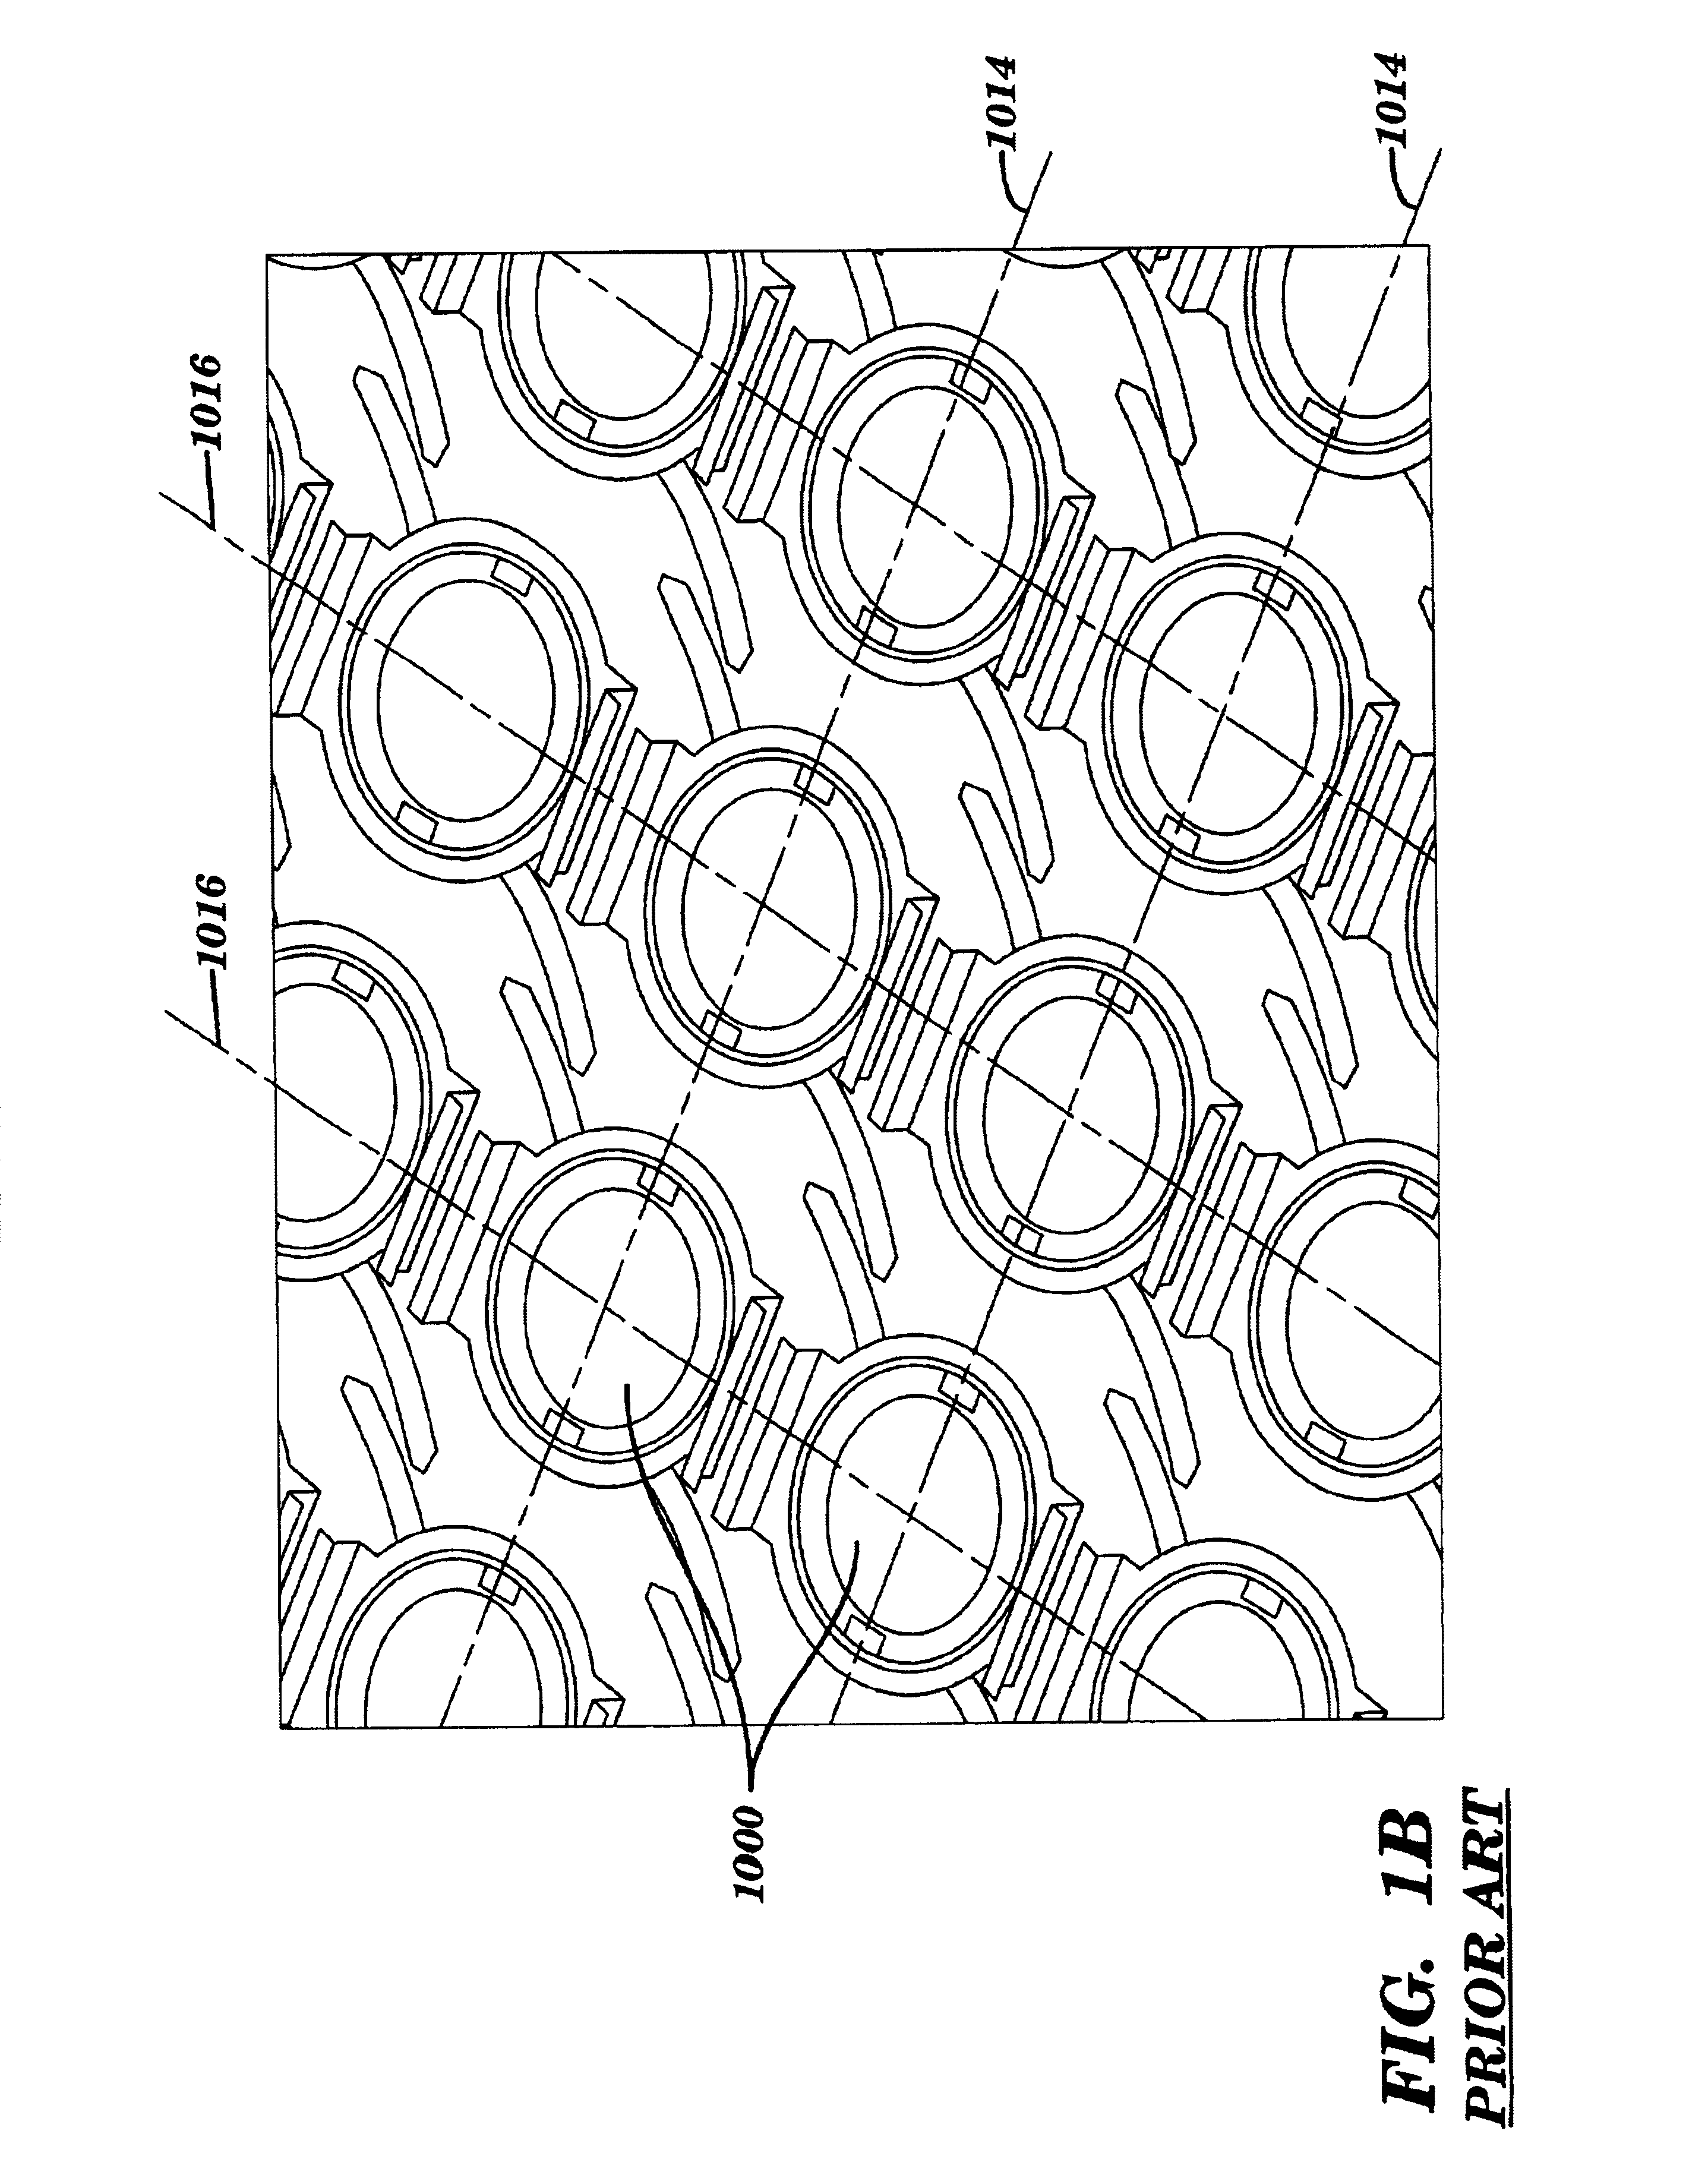 Method and apparatus for beam deflection